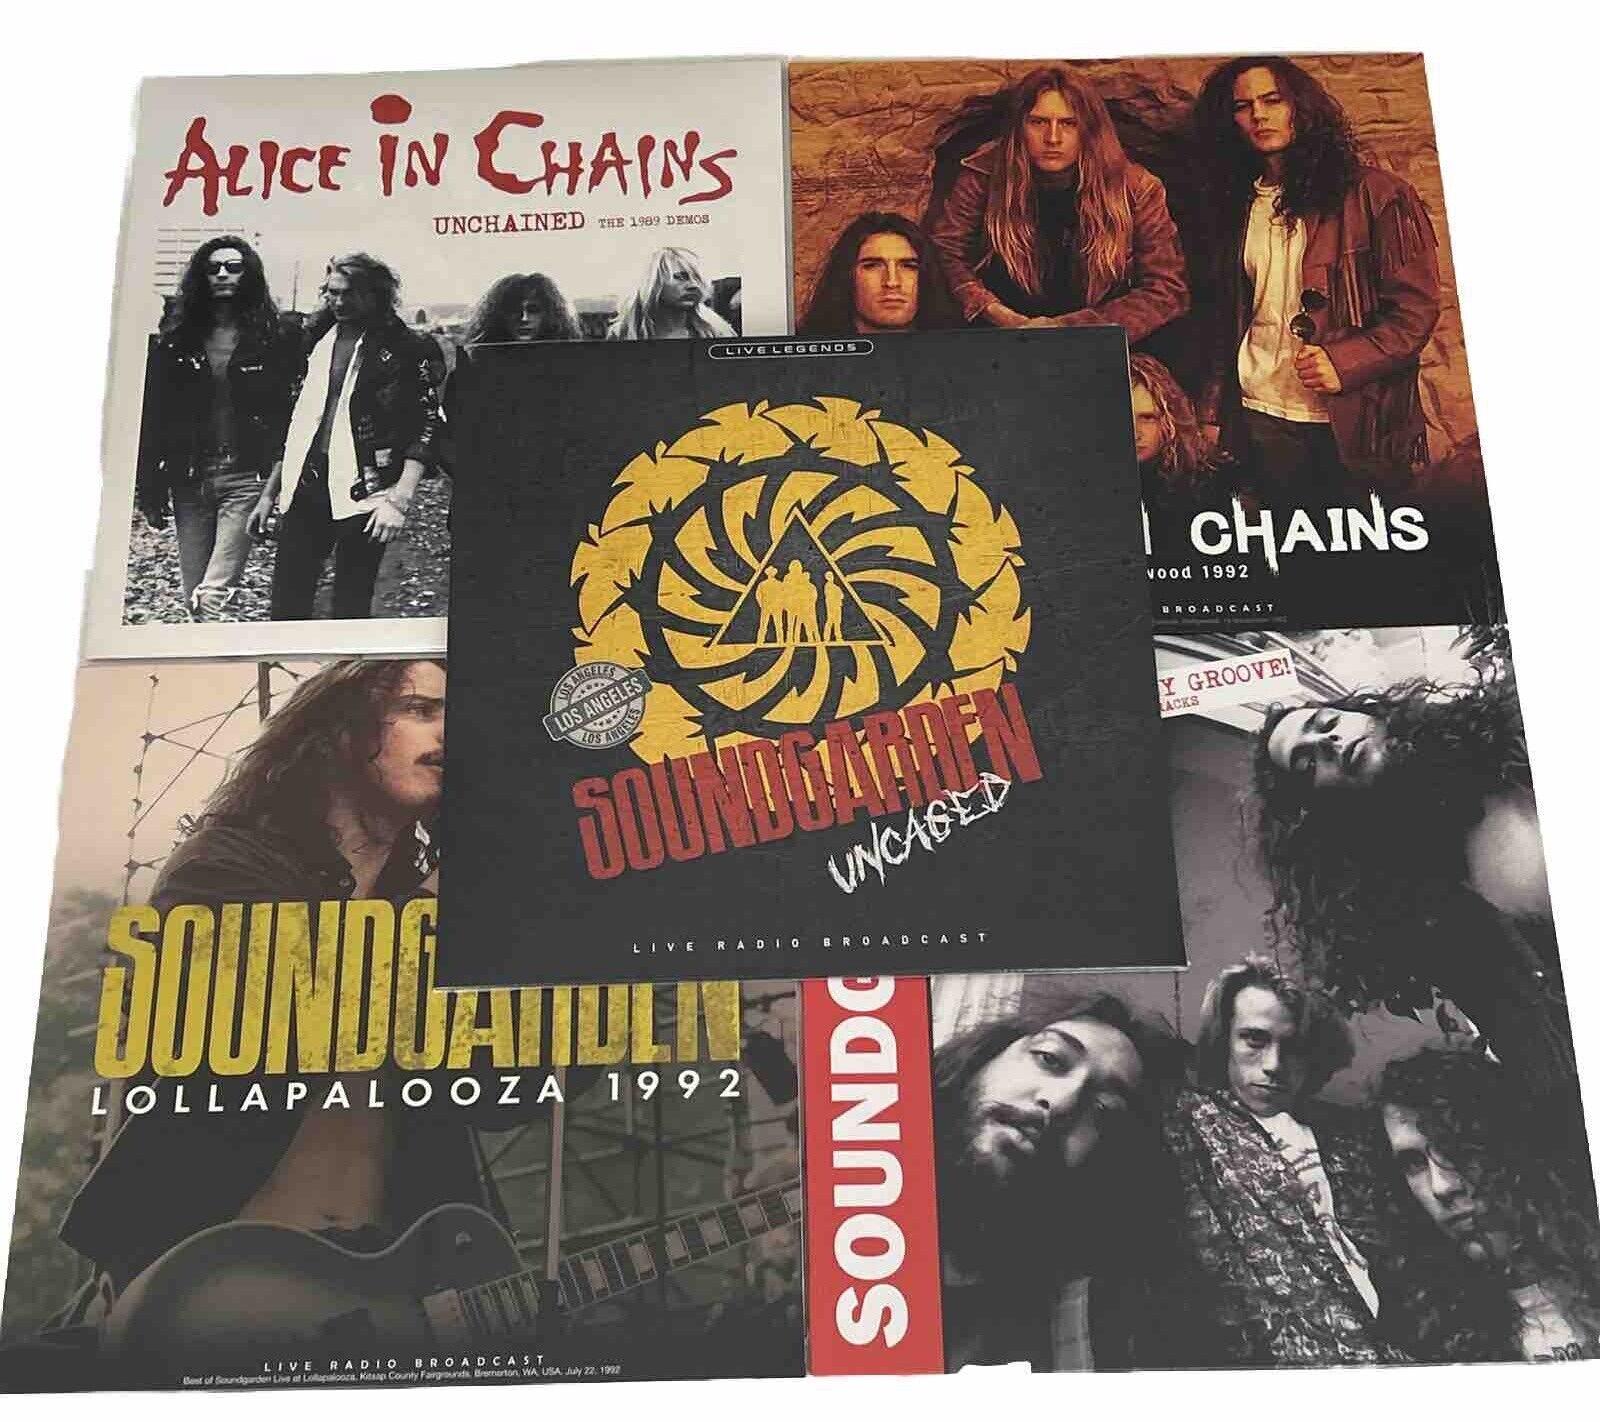 Alice N Chains unchained 1989 demos Soundgarden lollapalooza 1992+ more